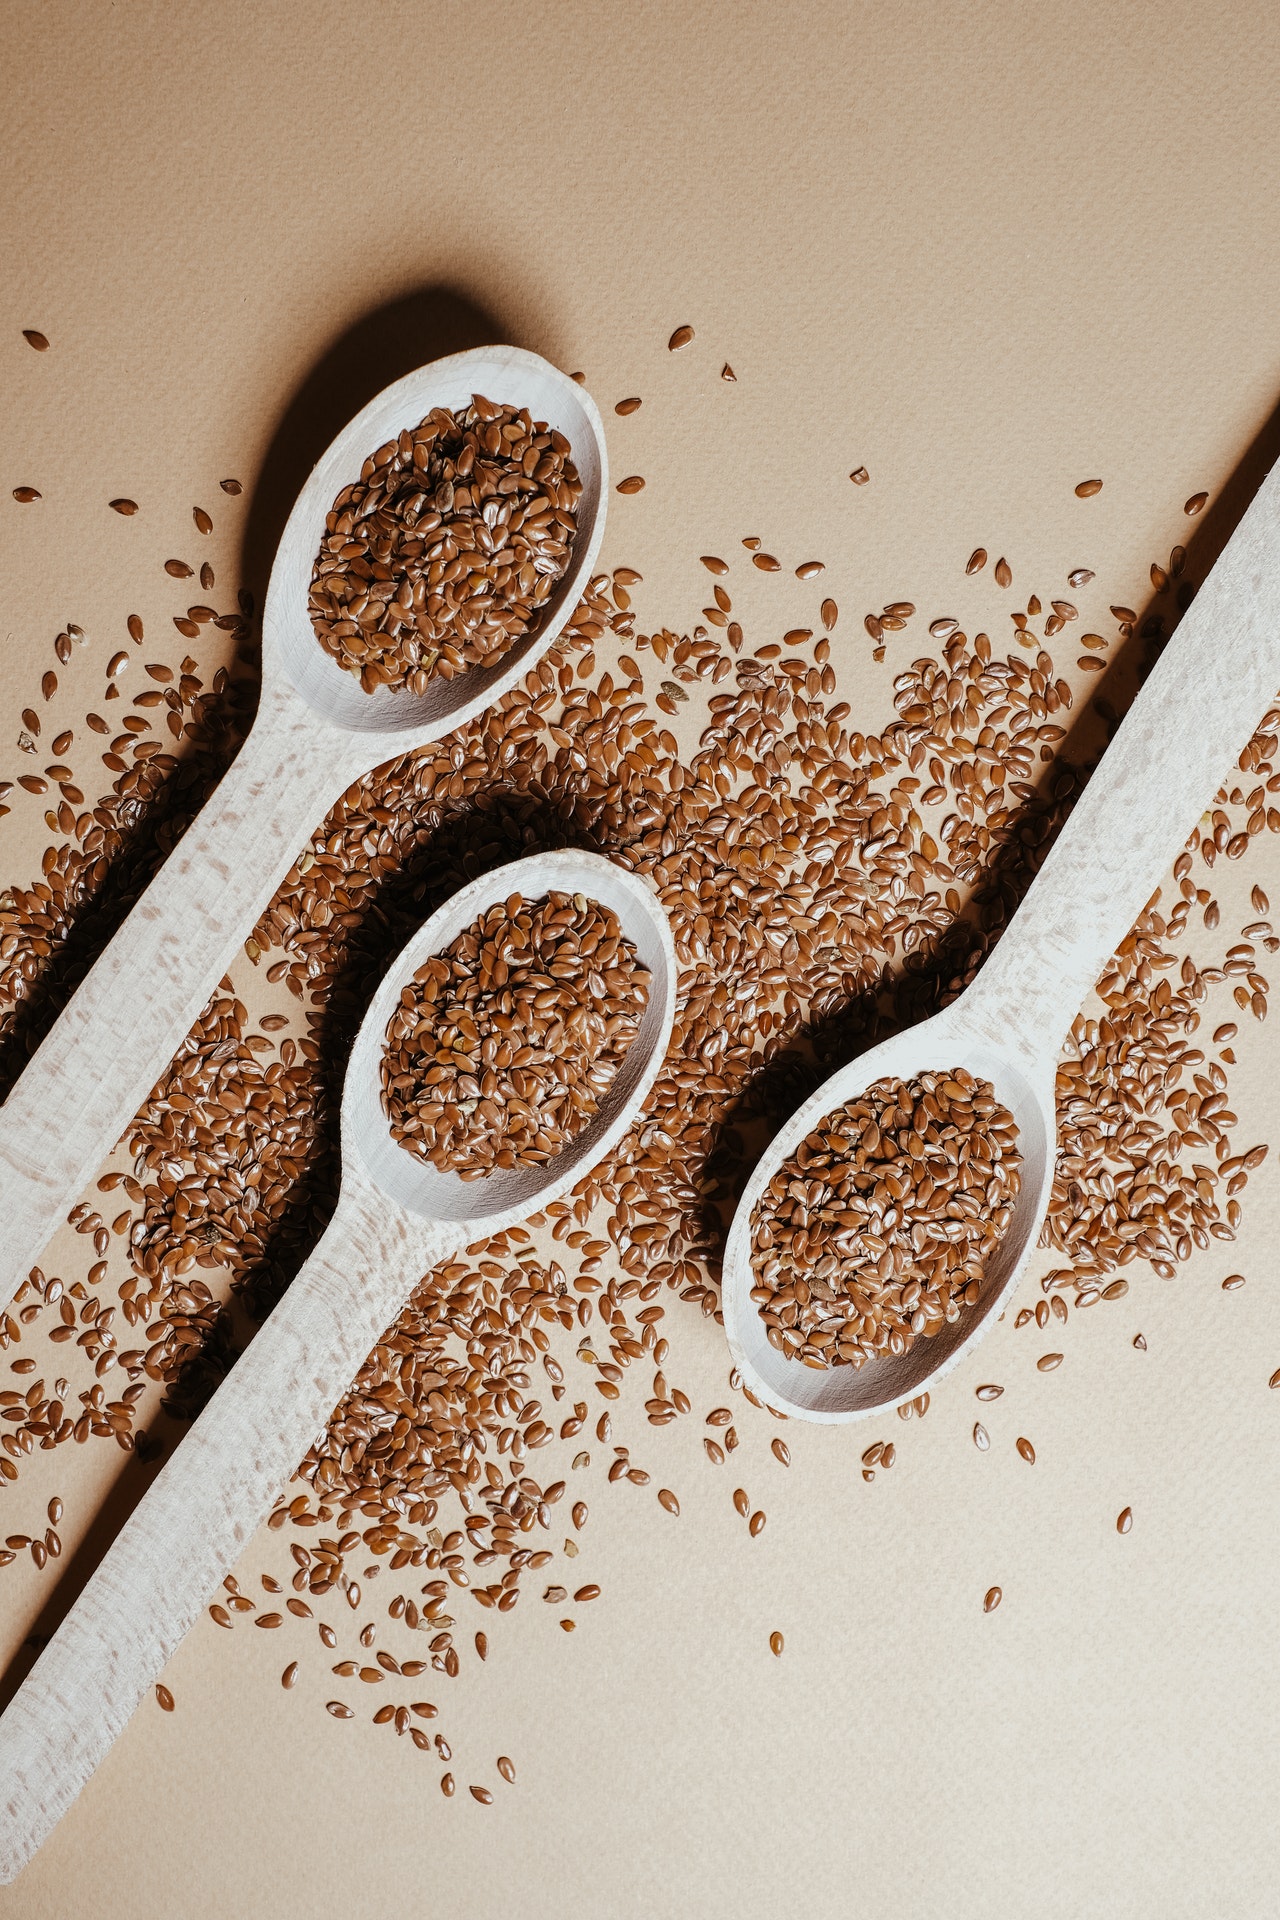 Drinking flaxseed – what results can you expect after a month of such treatment?